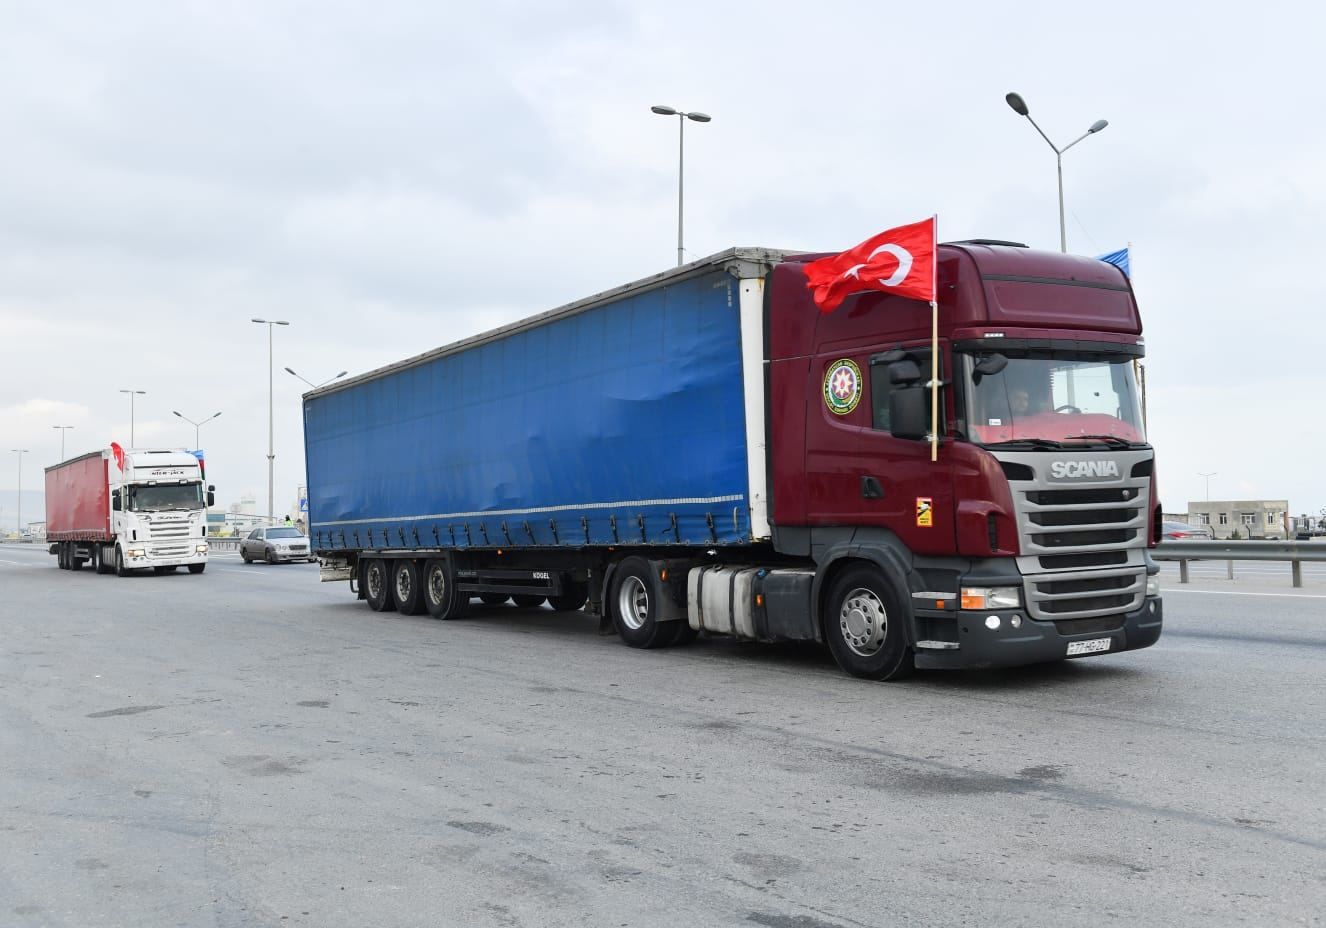 As instructed by Azerbaijani president, Border Service sends another humanitarian aid convoy to Turkiye [PHOTOS]